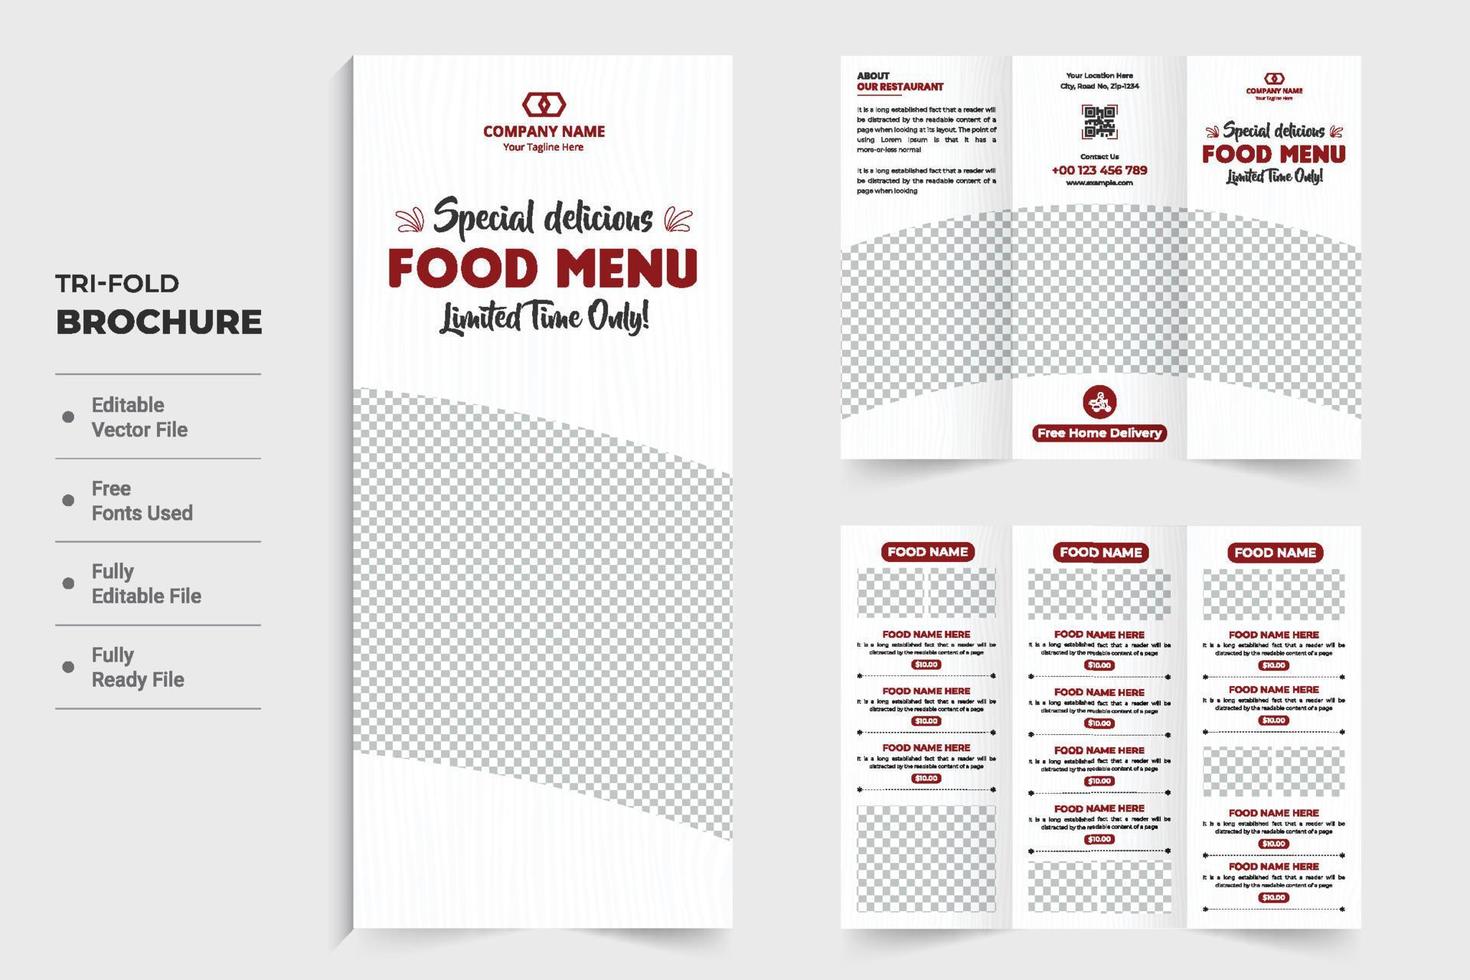 Delicious food menu discount, promotional brochure design with photo placeholders. Double sided food menu list template for restaurant. Culinary tri fold brochure vector with red and white colors.